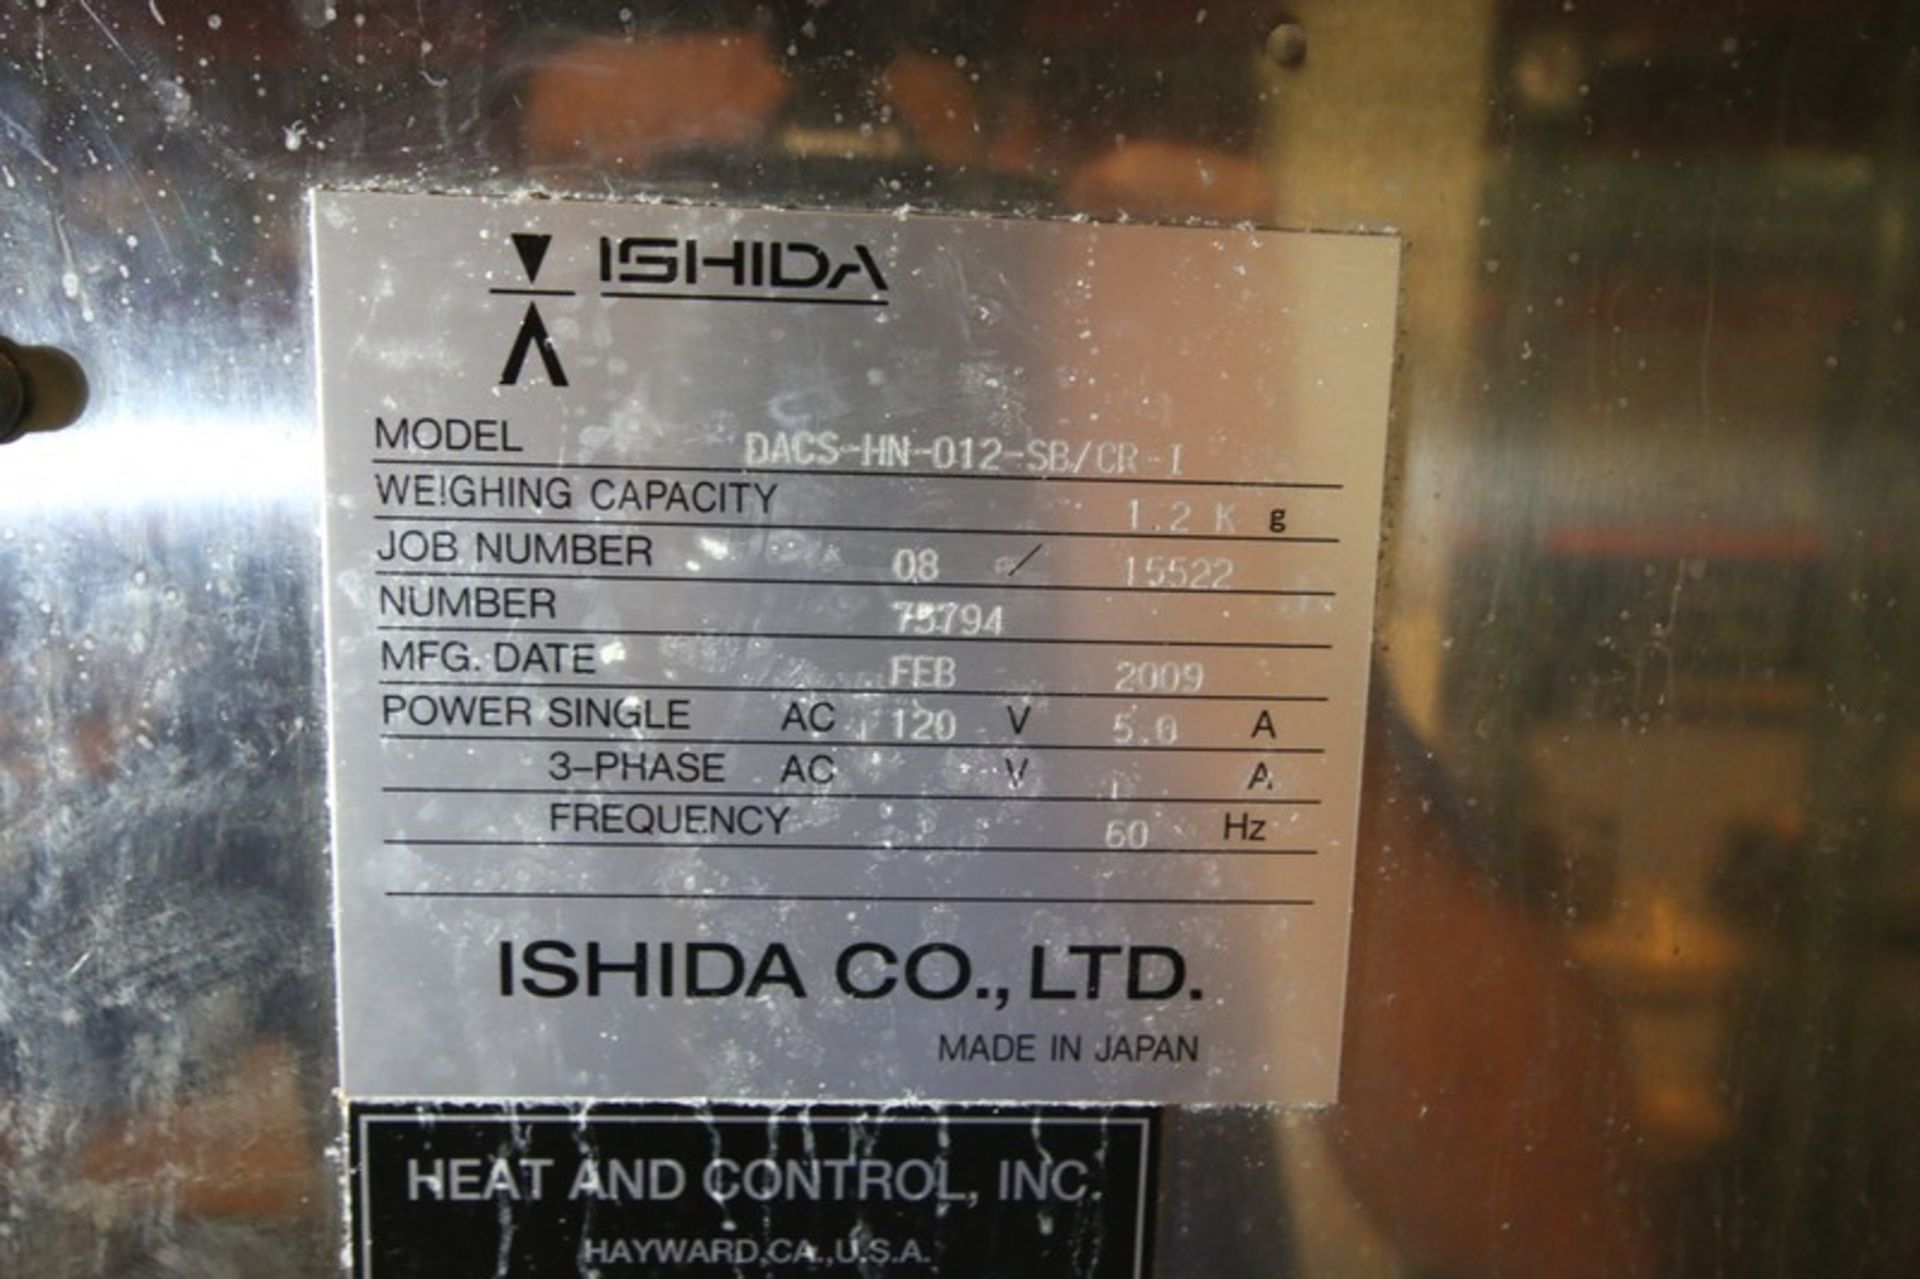 2009 All S/S Ishida Checkweigher, Model DACS-HN-012-SB/CR-1, S/N 75794 with ~2 ft. L Conveyor with - Image 5 of 5